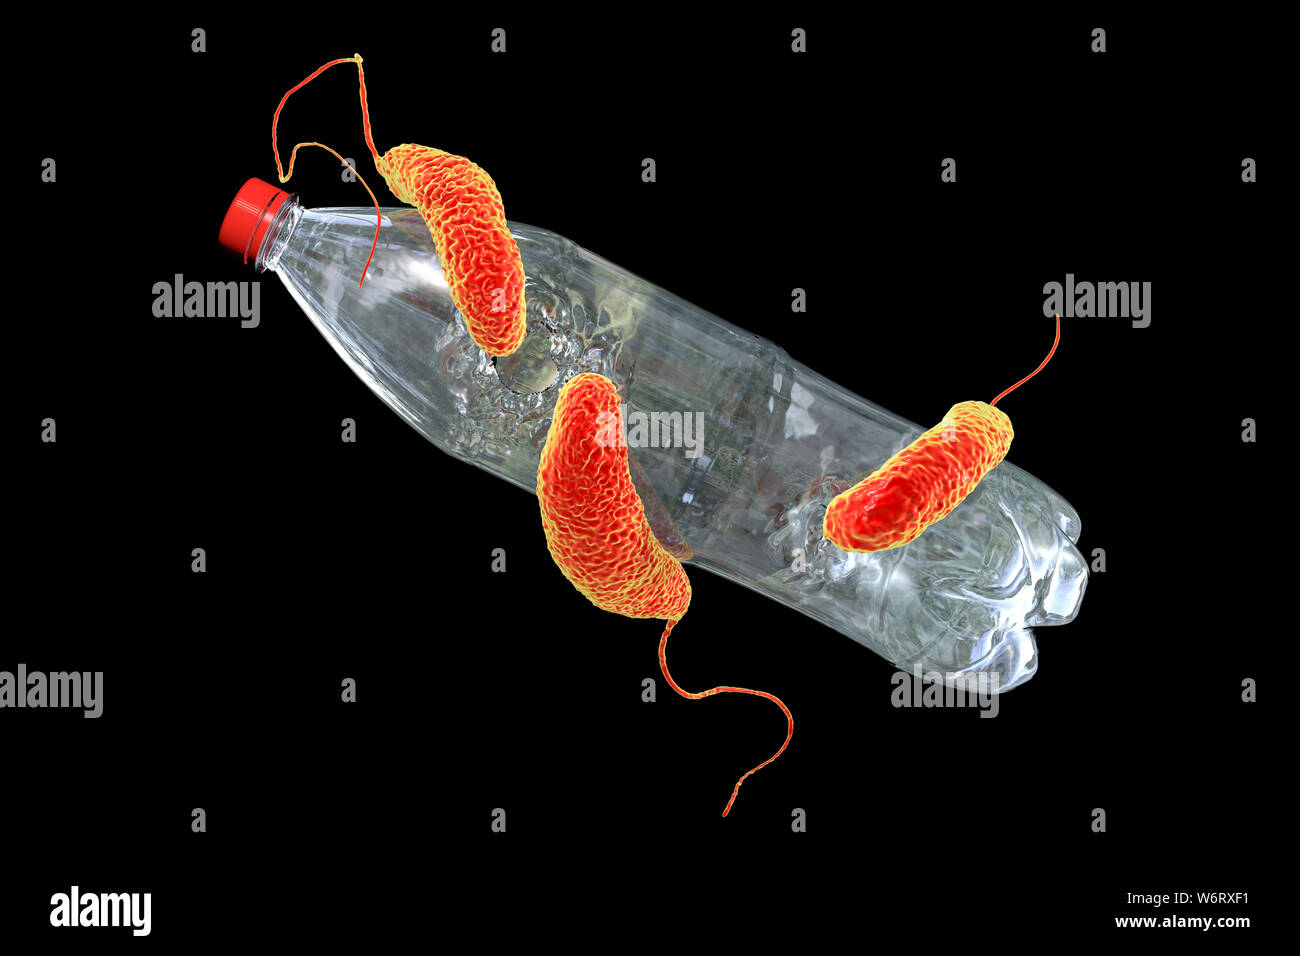 Computer illustration of Ideonella sakaiensis bacteria degrading a plastic bottle. I. sakaiensis was discovered in 2016 in sediment near a plastic bottle recycling facility in Japan. It is able to use the plastic polyethylene terephthalate (PET) as its primary energy source. To do so it uses two enzymes, PET hydrolase (PETase) and MHET hydrolase (MHETase), to convert PET to terephthalic acid (TPA) and ethylene glycol. Stock Photo